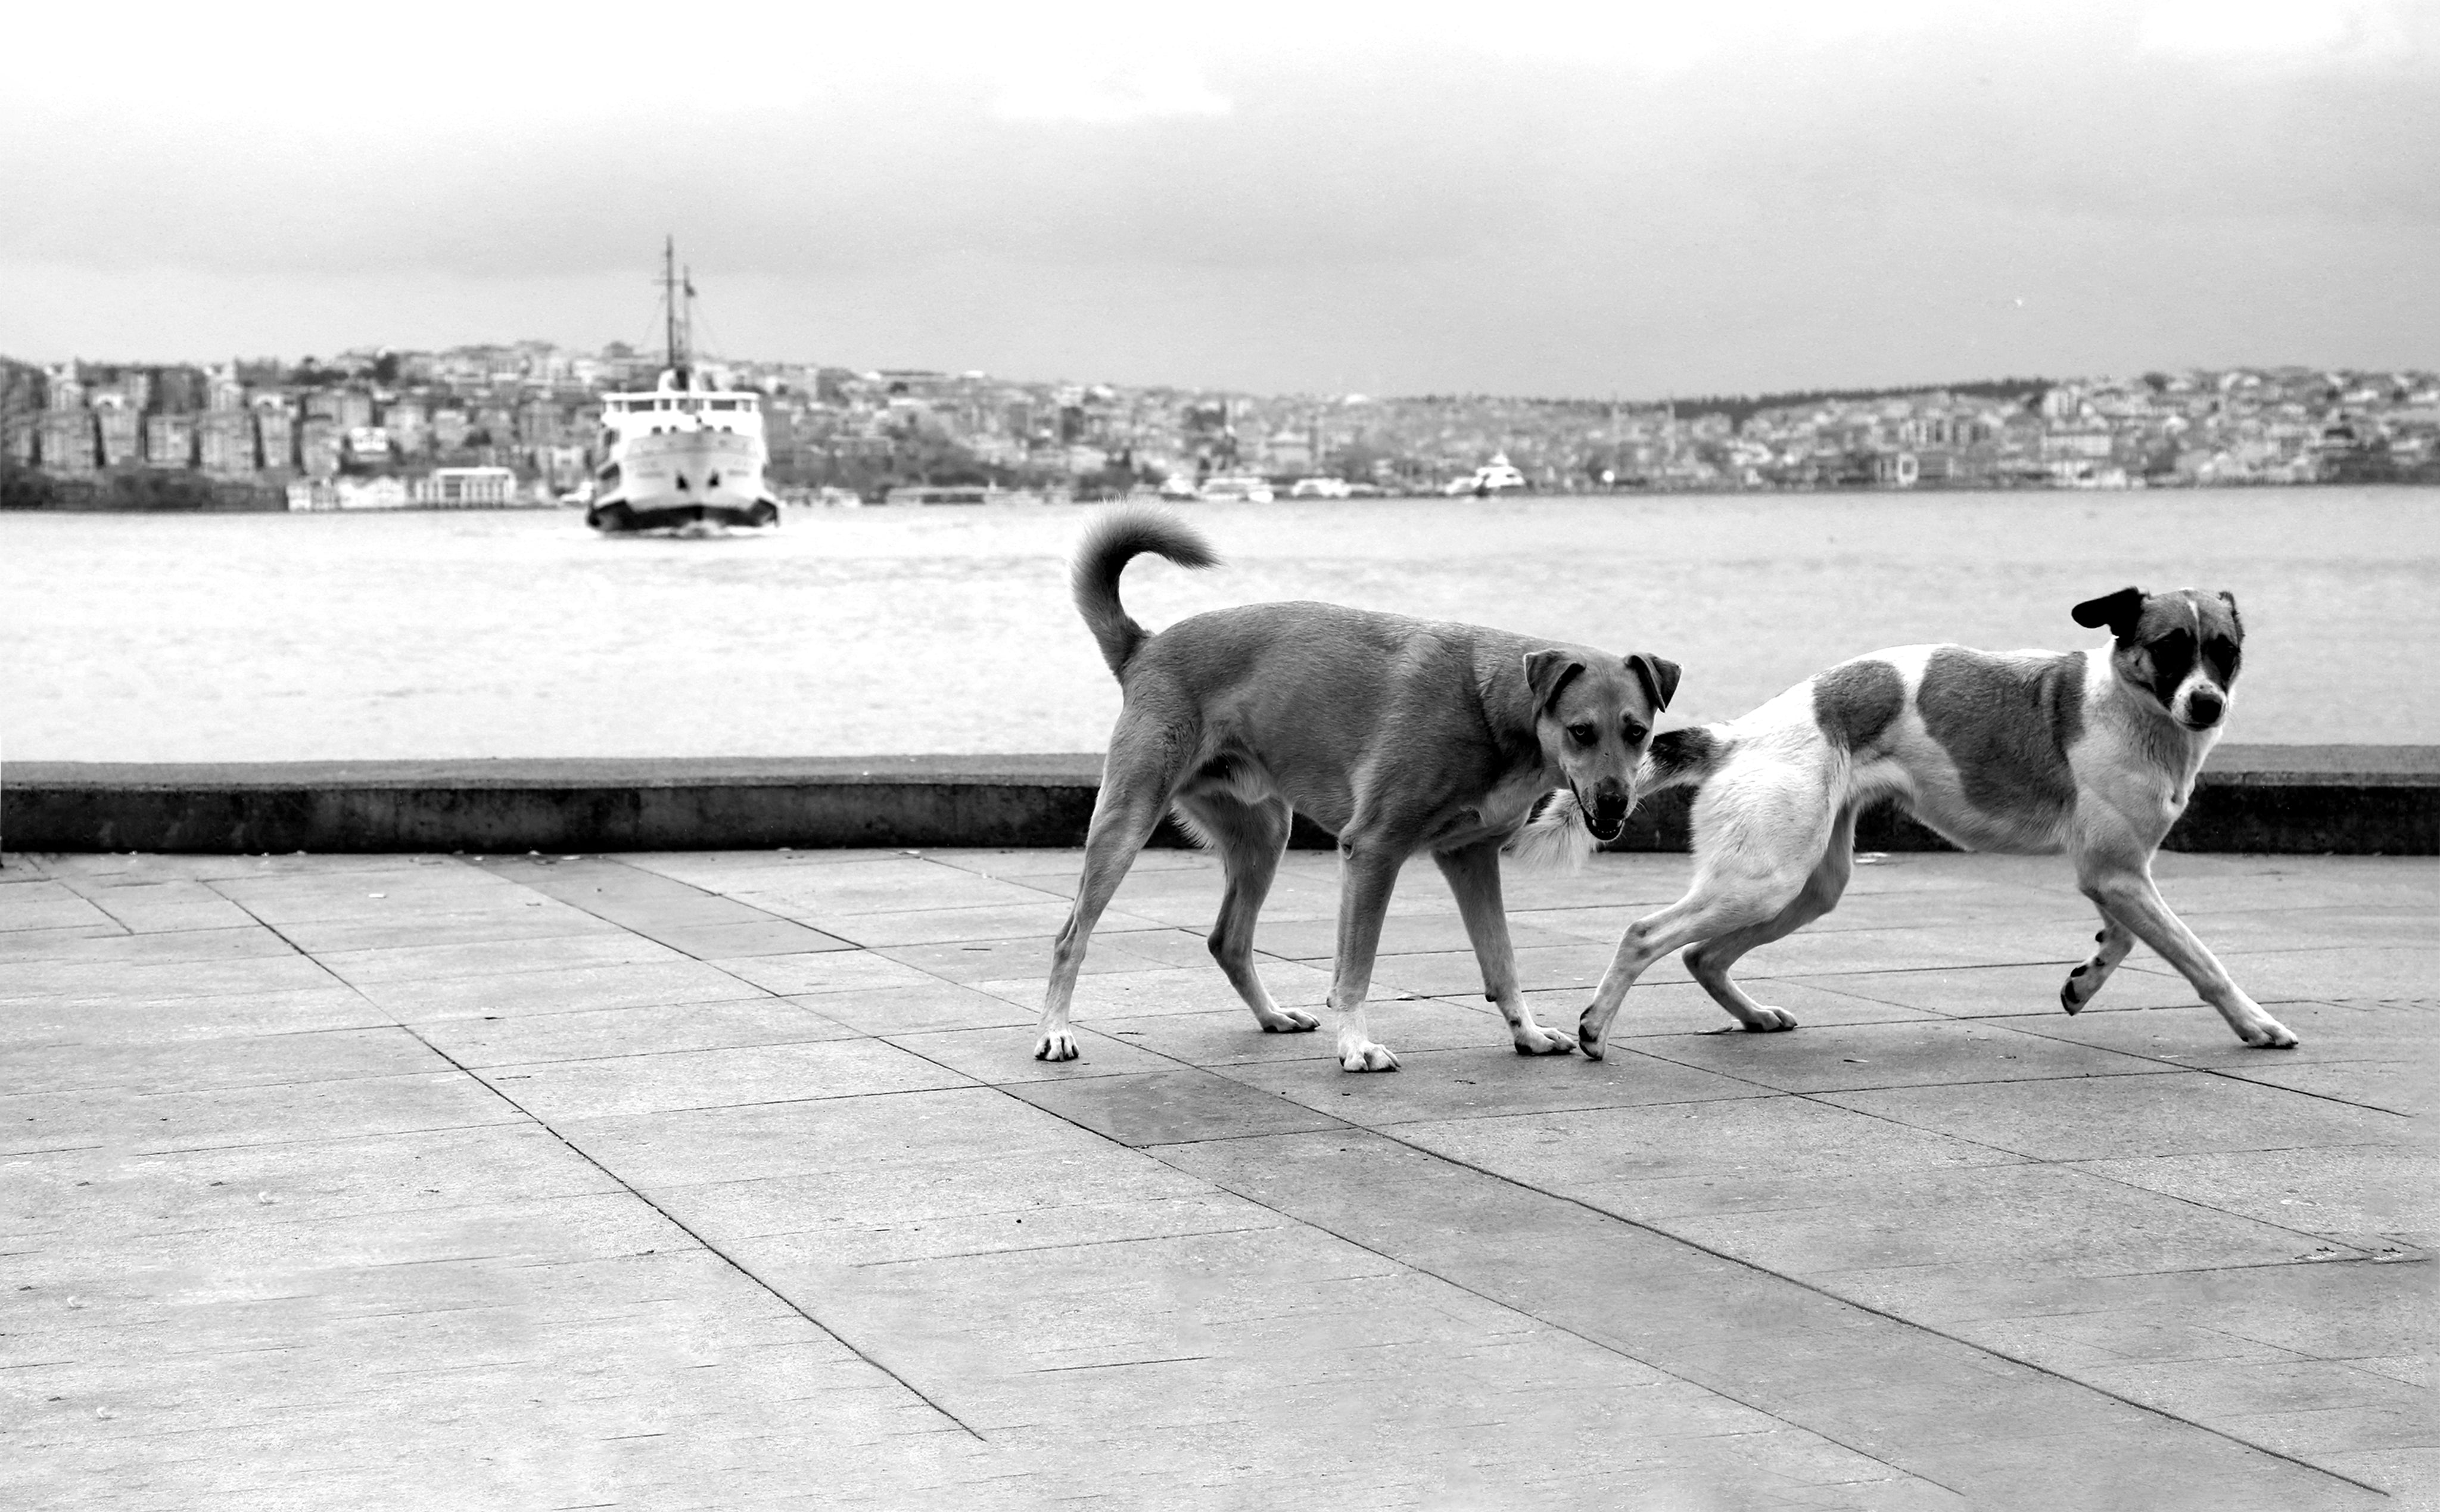 two-dogs-walking-by-the-water-in-black-and-white.jpg